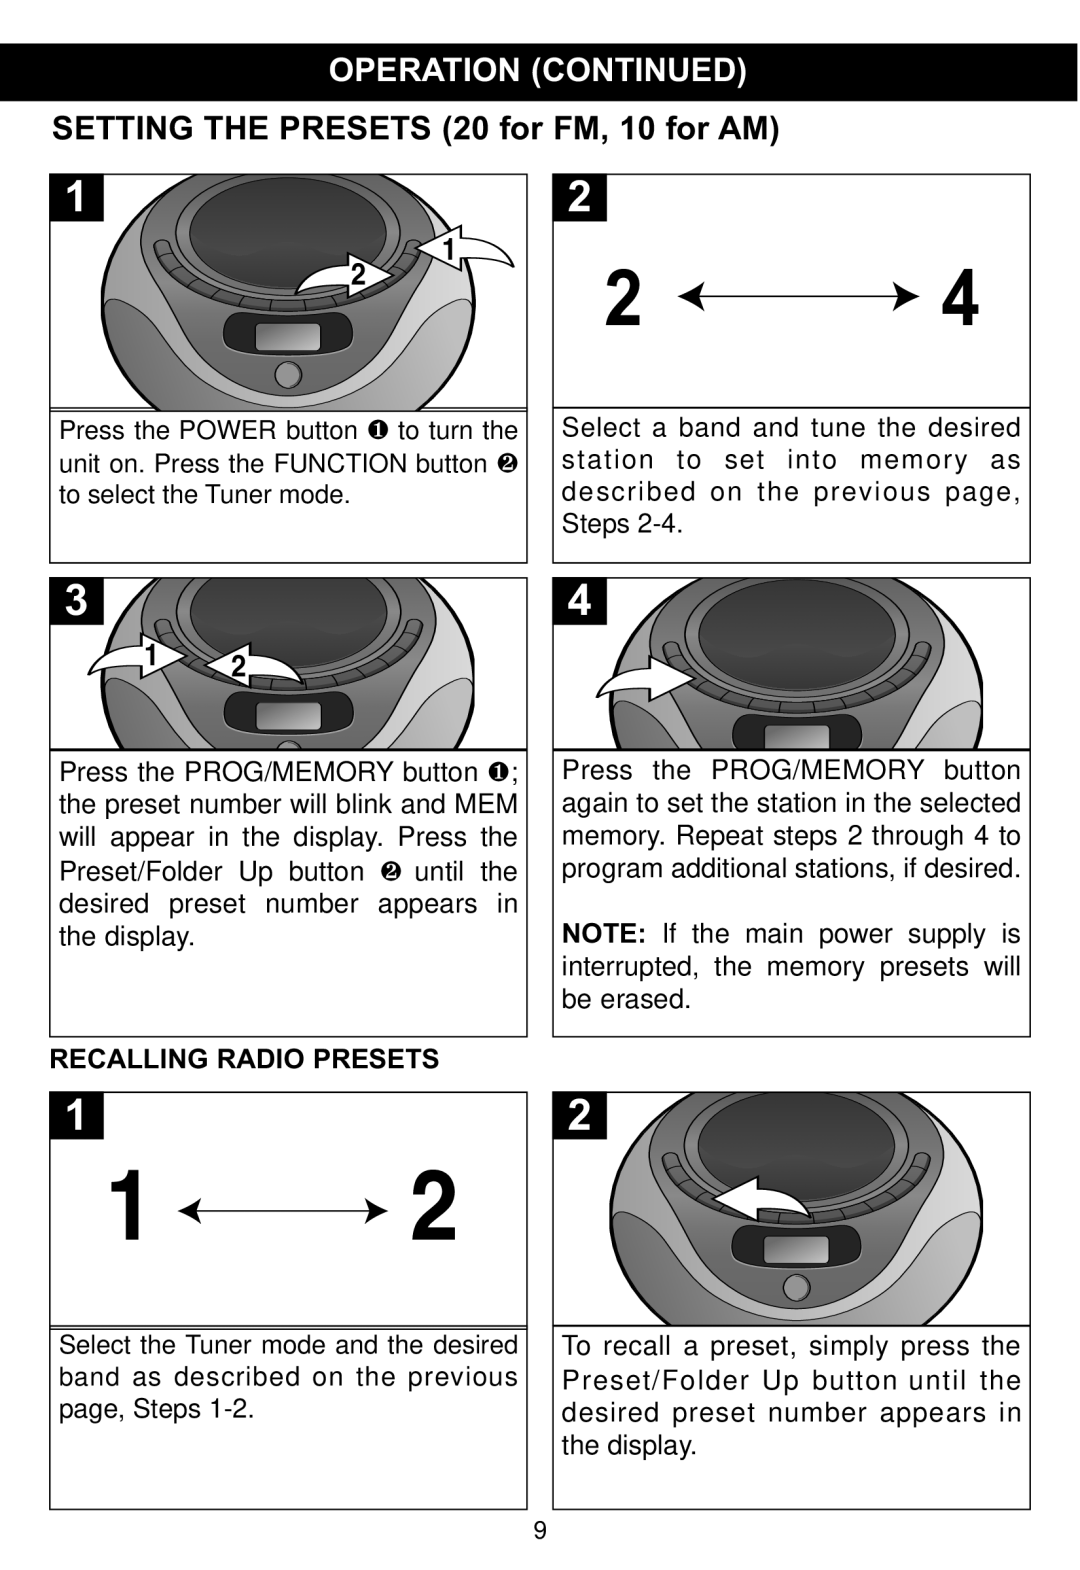 Memorex MP4047 manual Operation Continued, SETTING THE PRESETS 20 for FM, 10 for AM, Recalling Radio Presets 